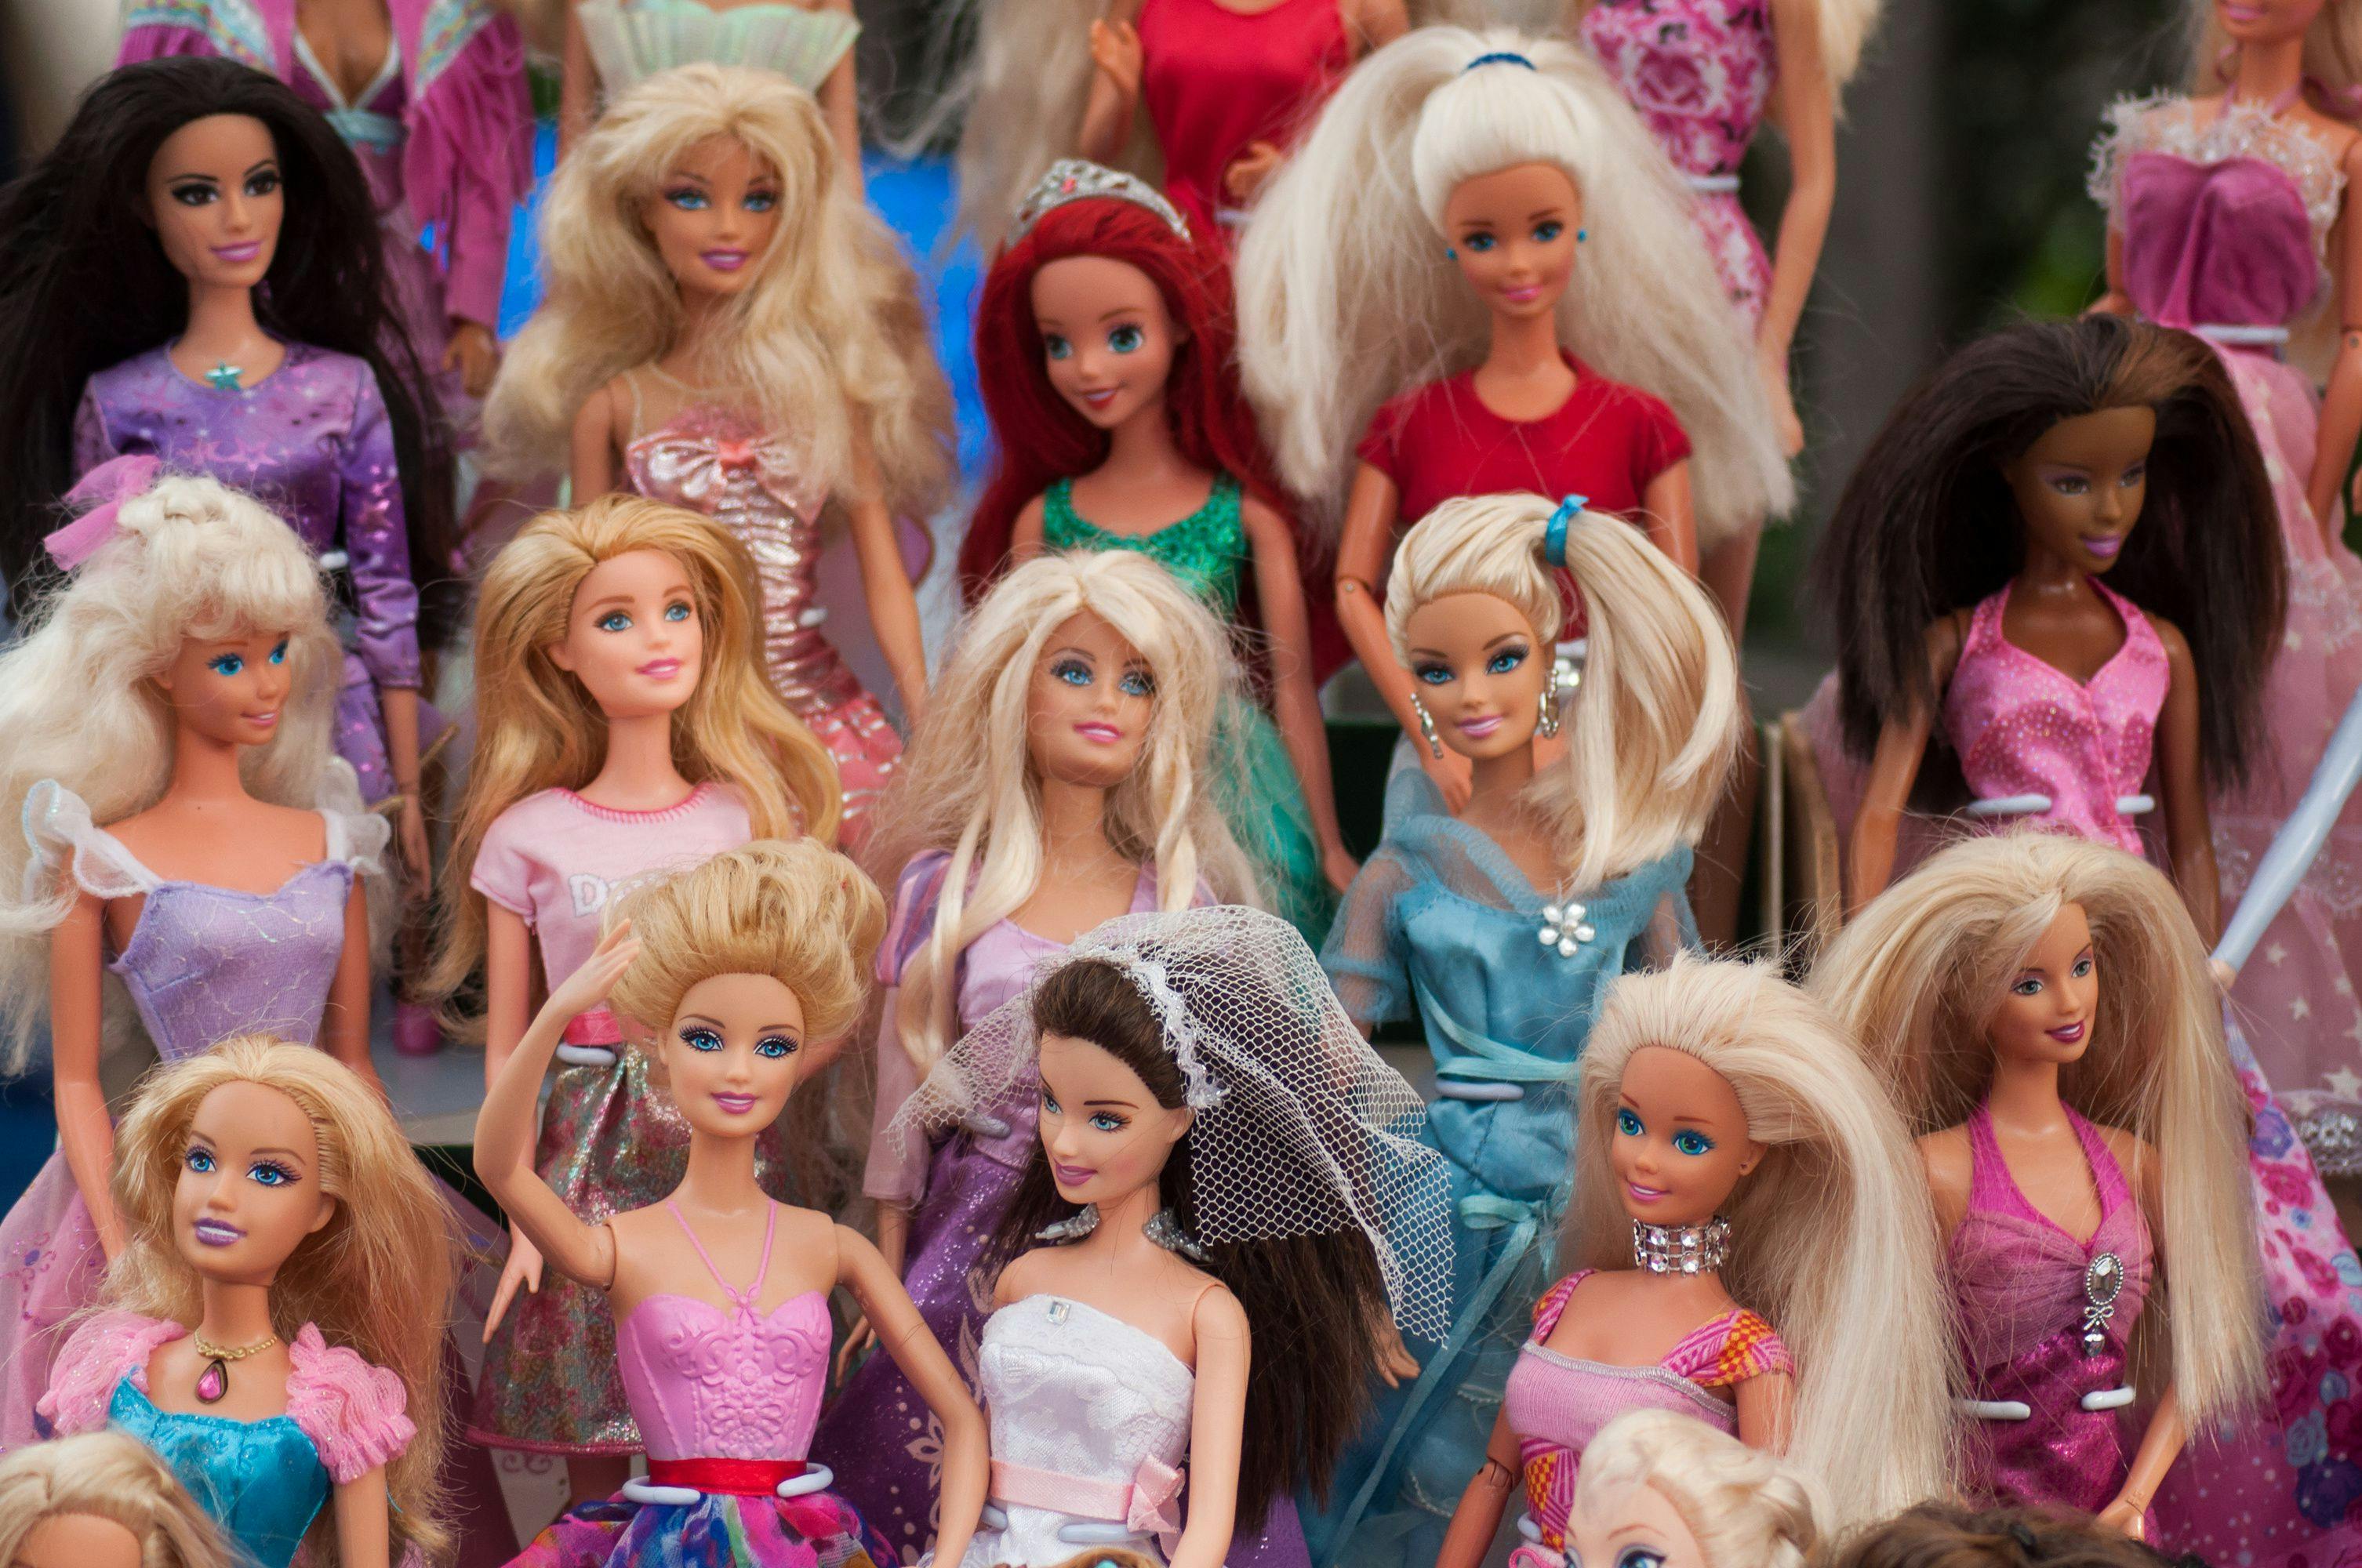 Barbie dolls collection at flea market in the street © pixarno - stock.adobe.com